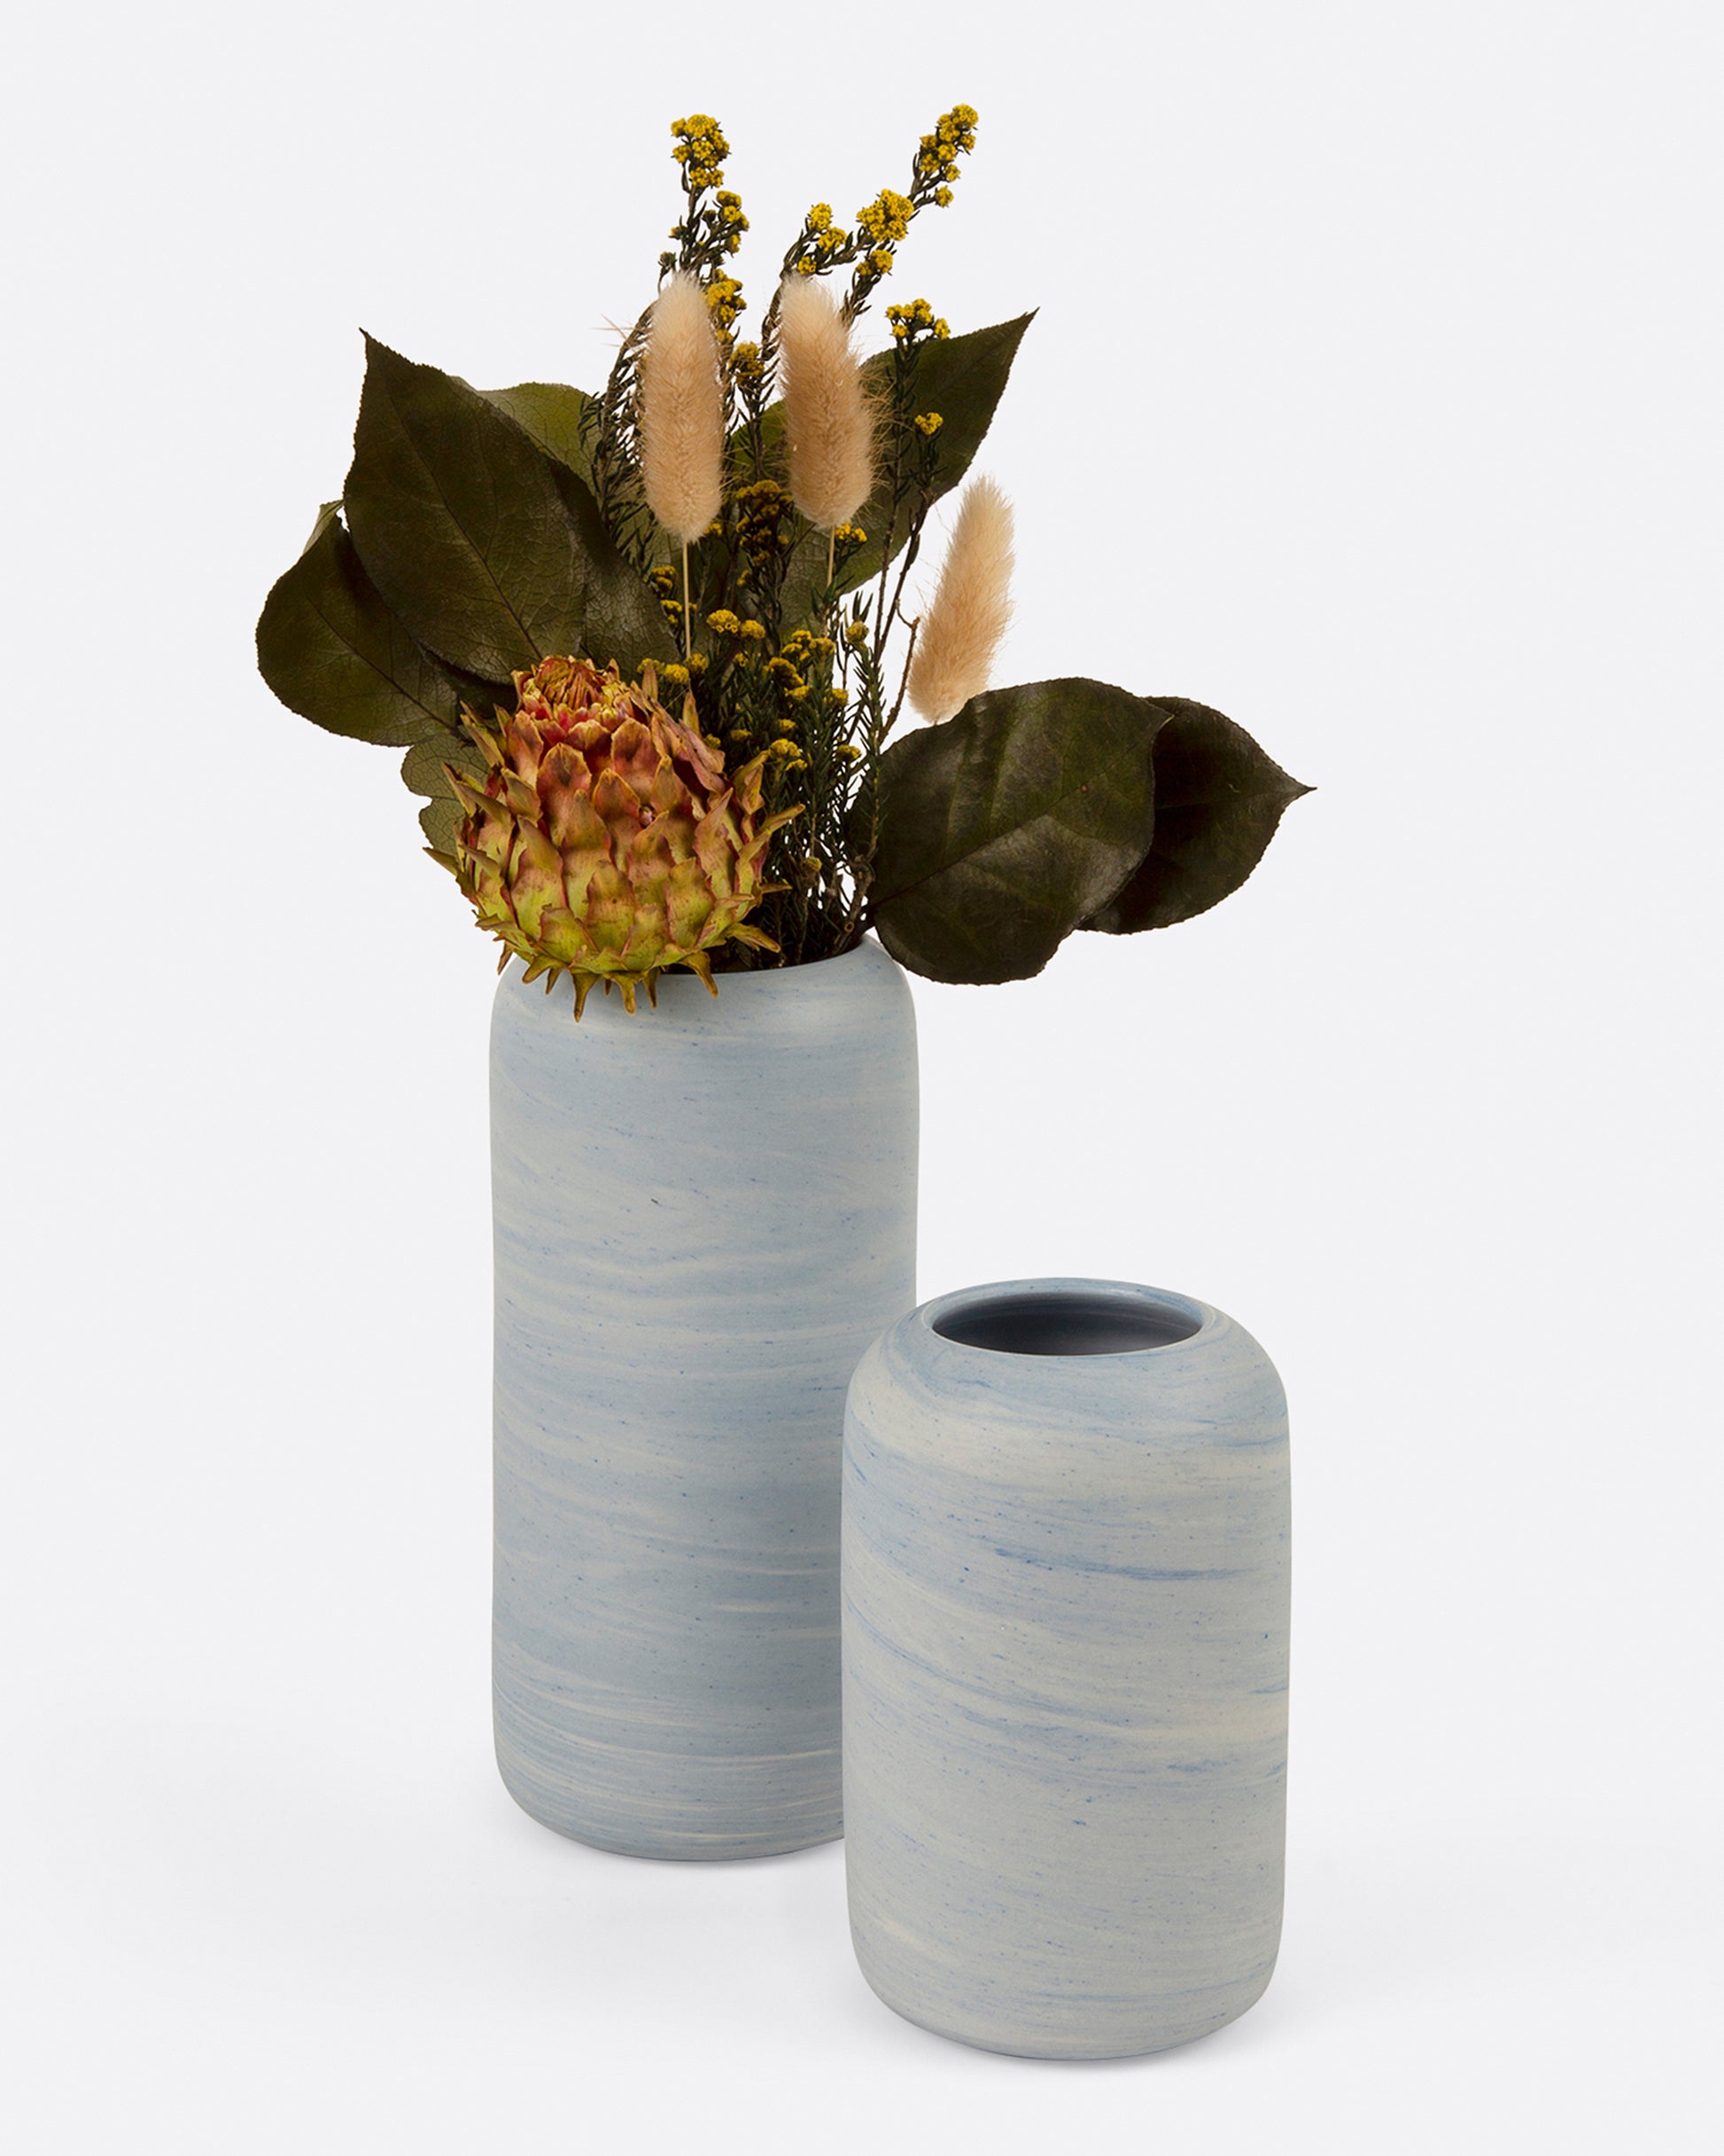 Two marbled blue and white porcelain vases, one small and one large, the larger with a floral arrangement.